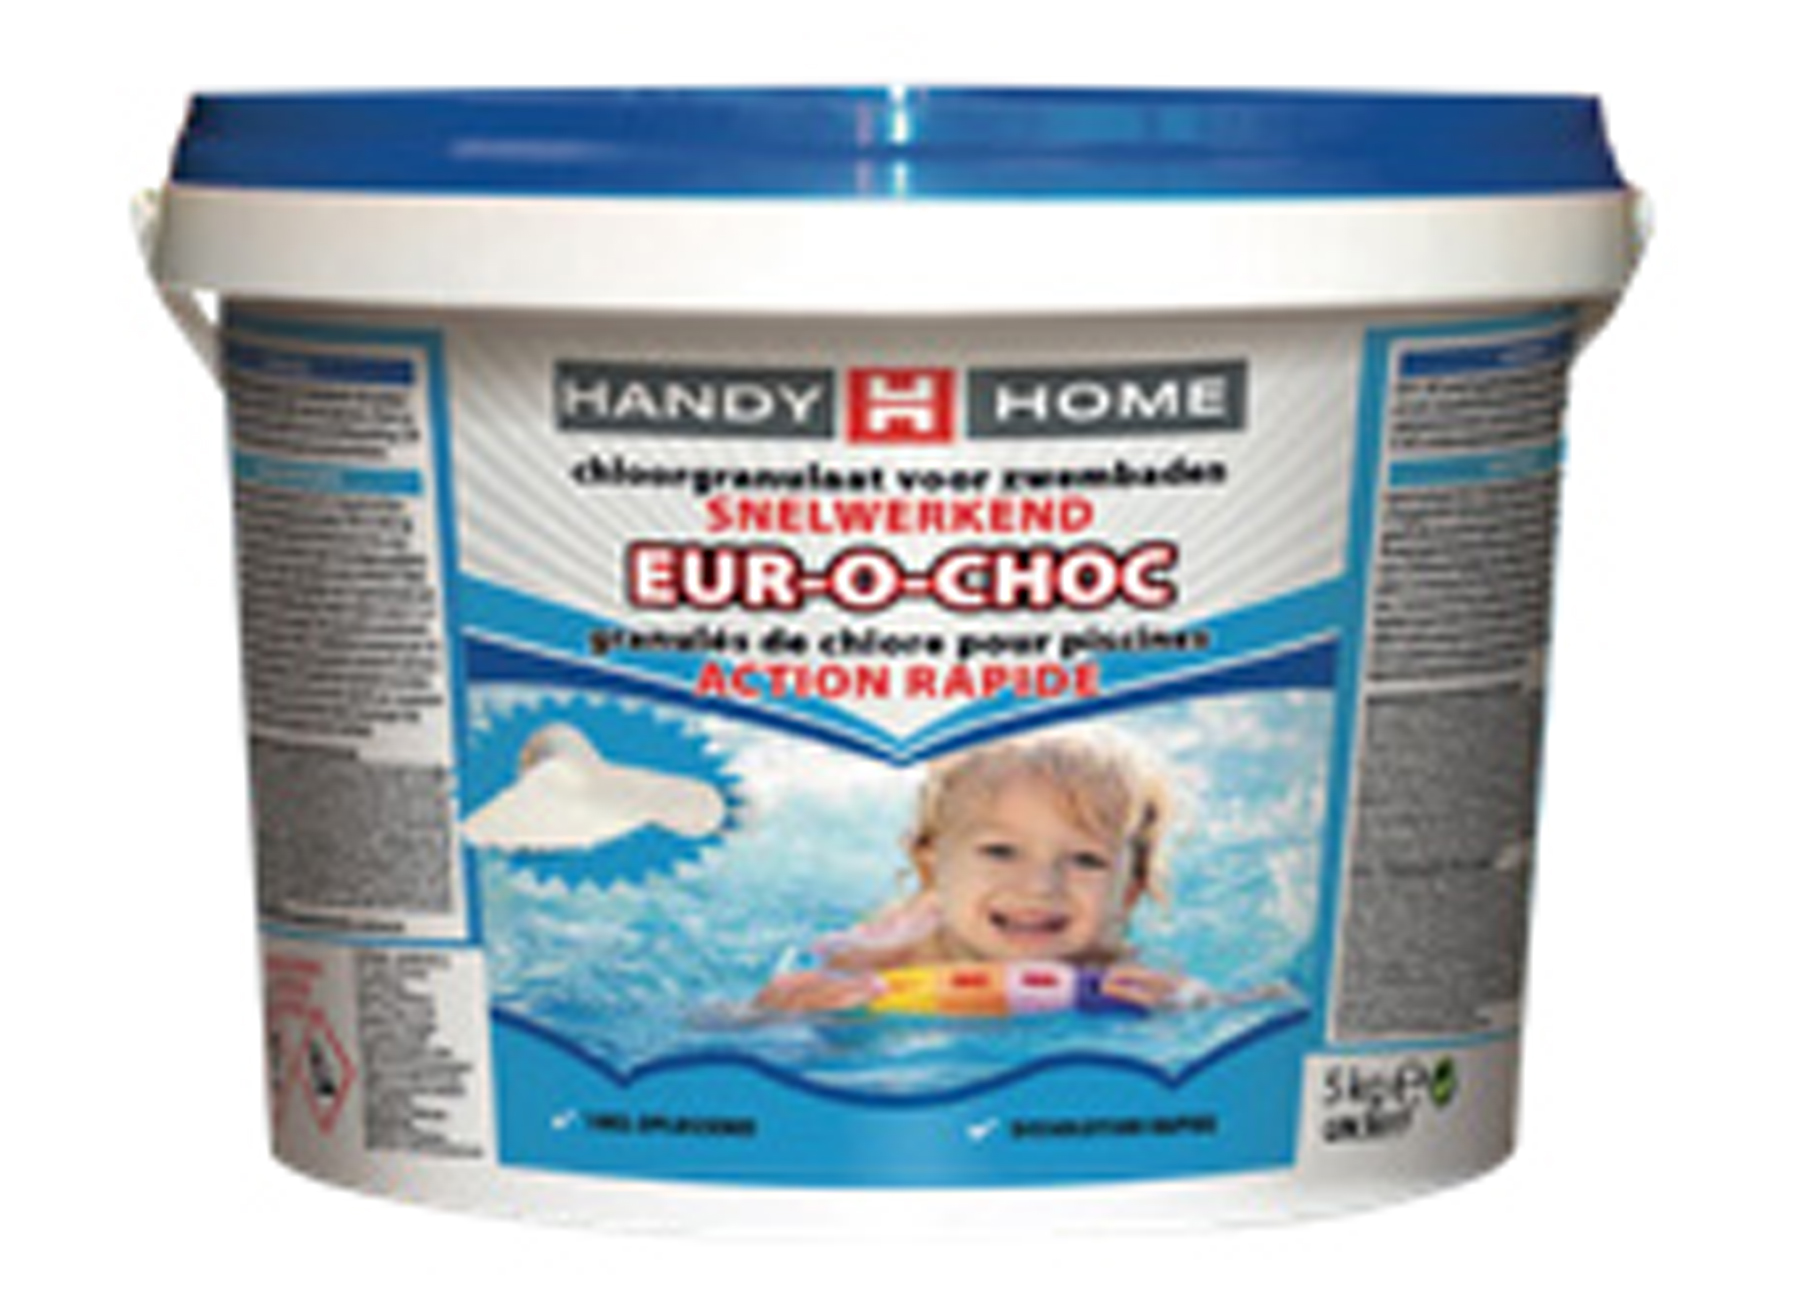 HANDYHOME EUR-O-CHOC CHLORE ACTION RAPIDE 5KG